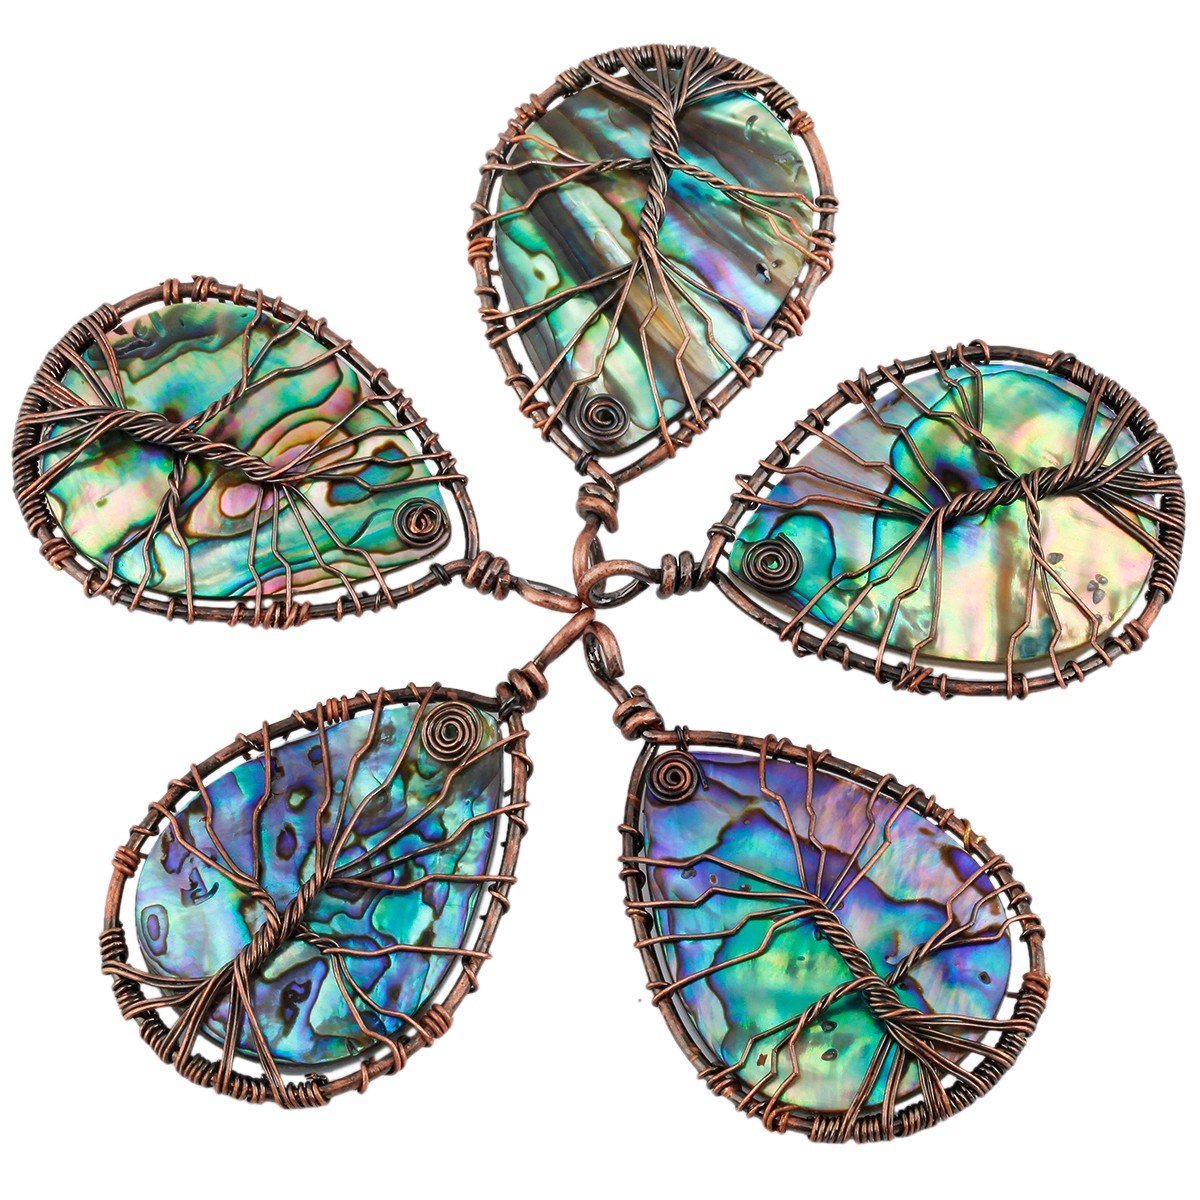 SUNYIK Abalone Shell Tree of Life Pendant,Necklaces for Women,Copper Wire Wrapped Jewelry,Assorted Shapes